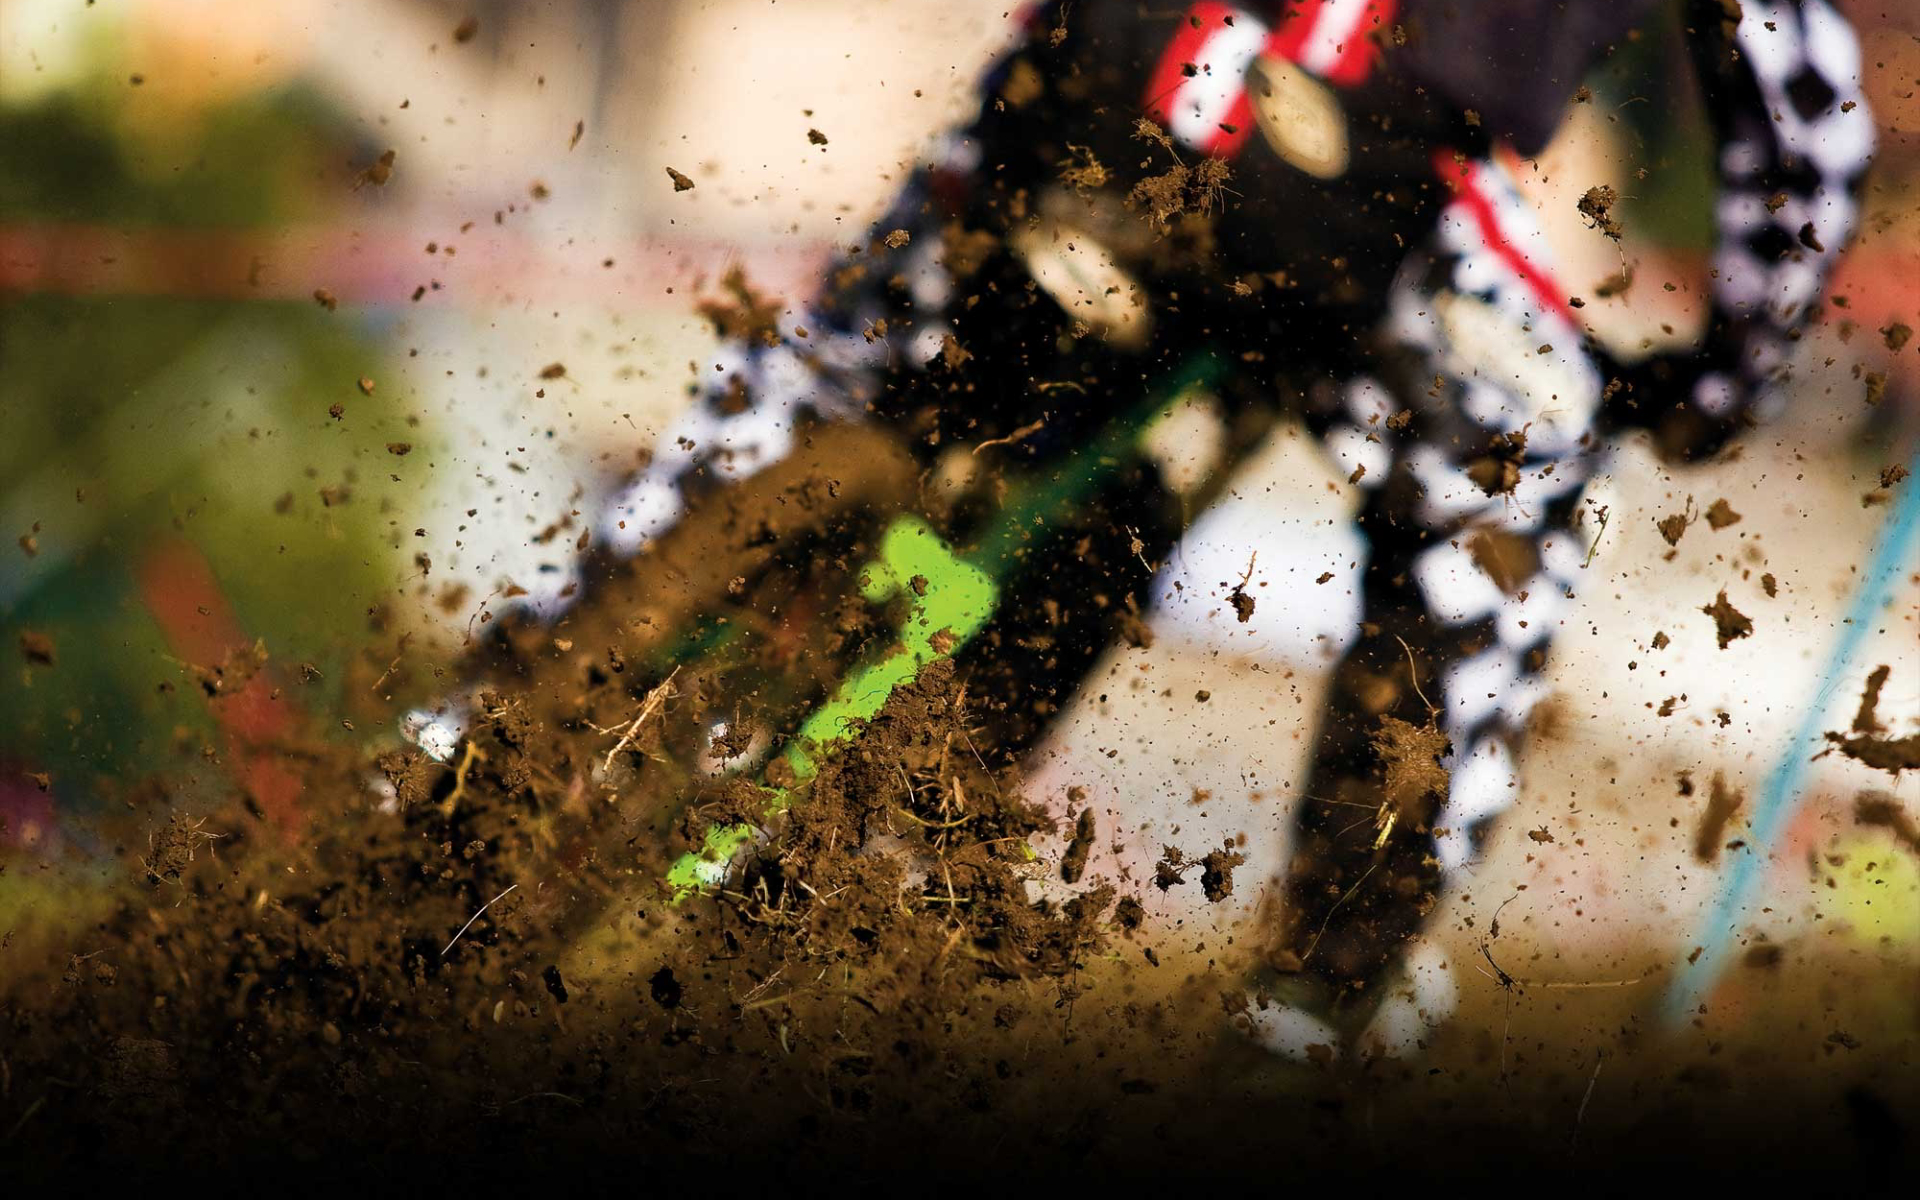 10 Awesome HD Motocross Wallpapers - HDWallSource.com